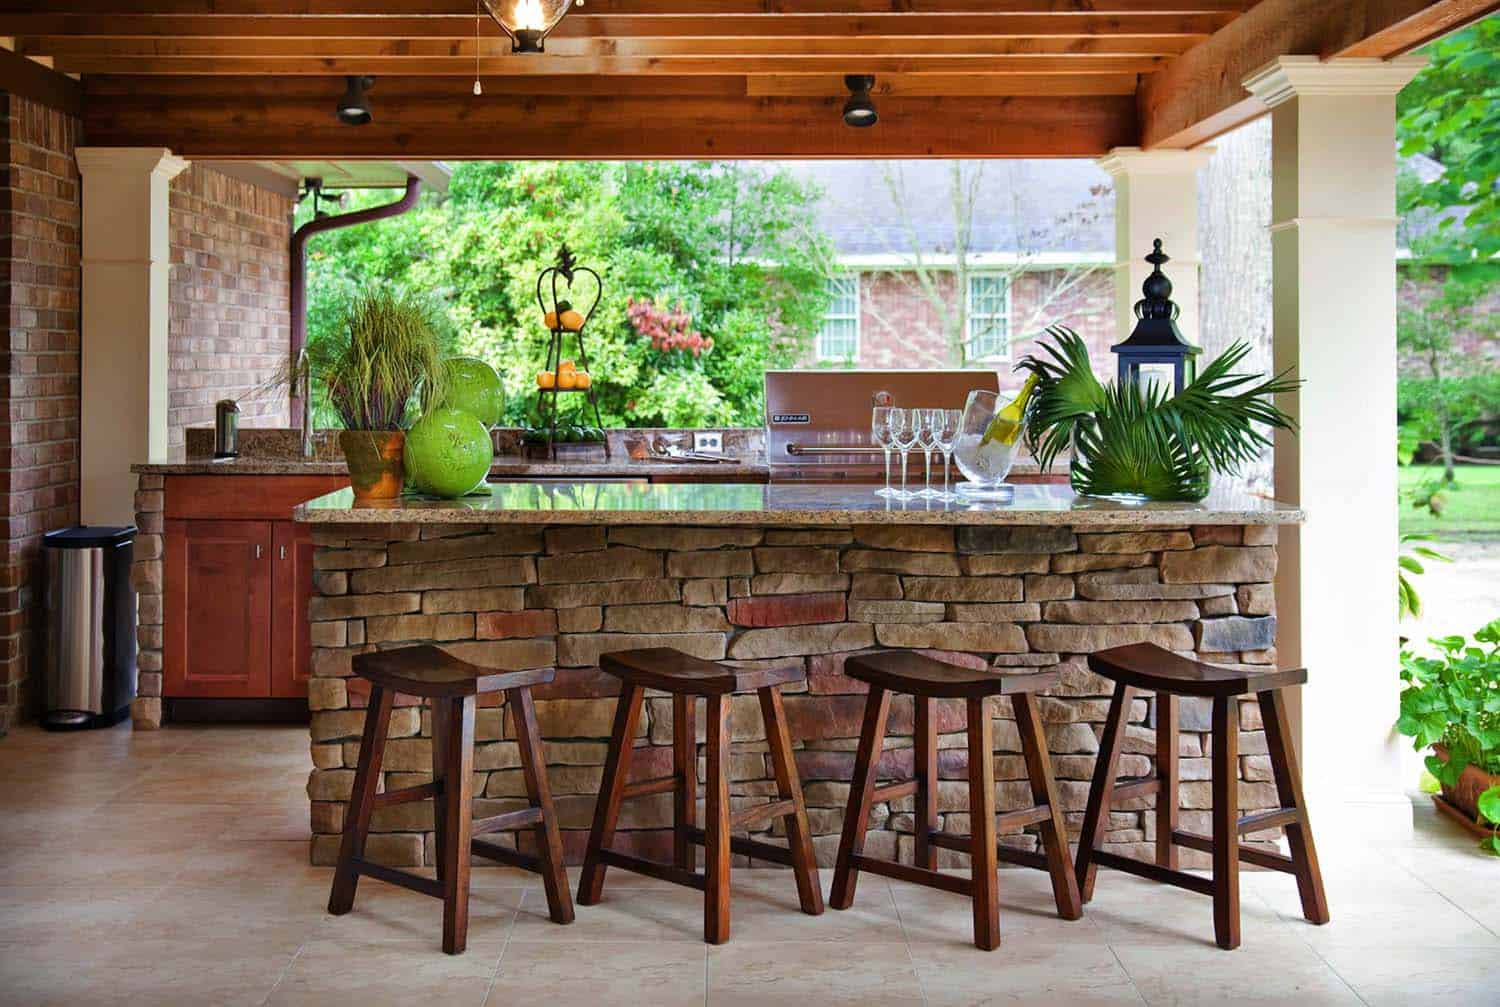 Outdoor Kitchen Design Ideas
 20 Spectacular outdoor kitchens with bars for entertaining